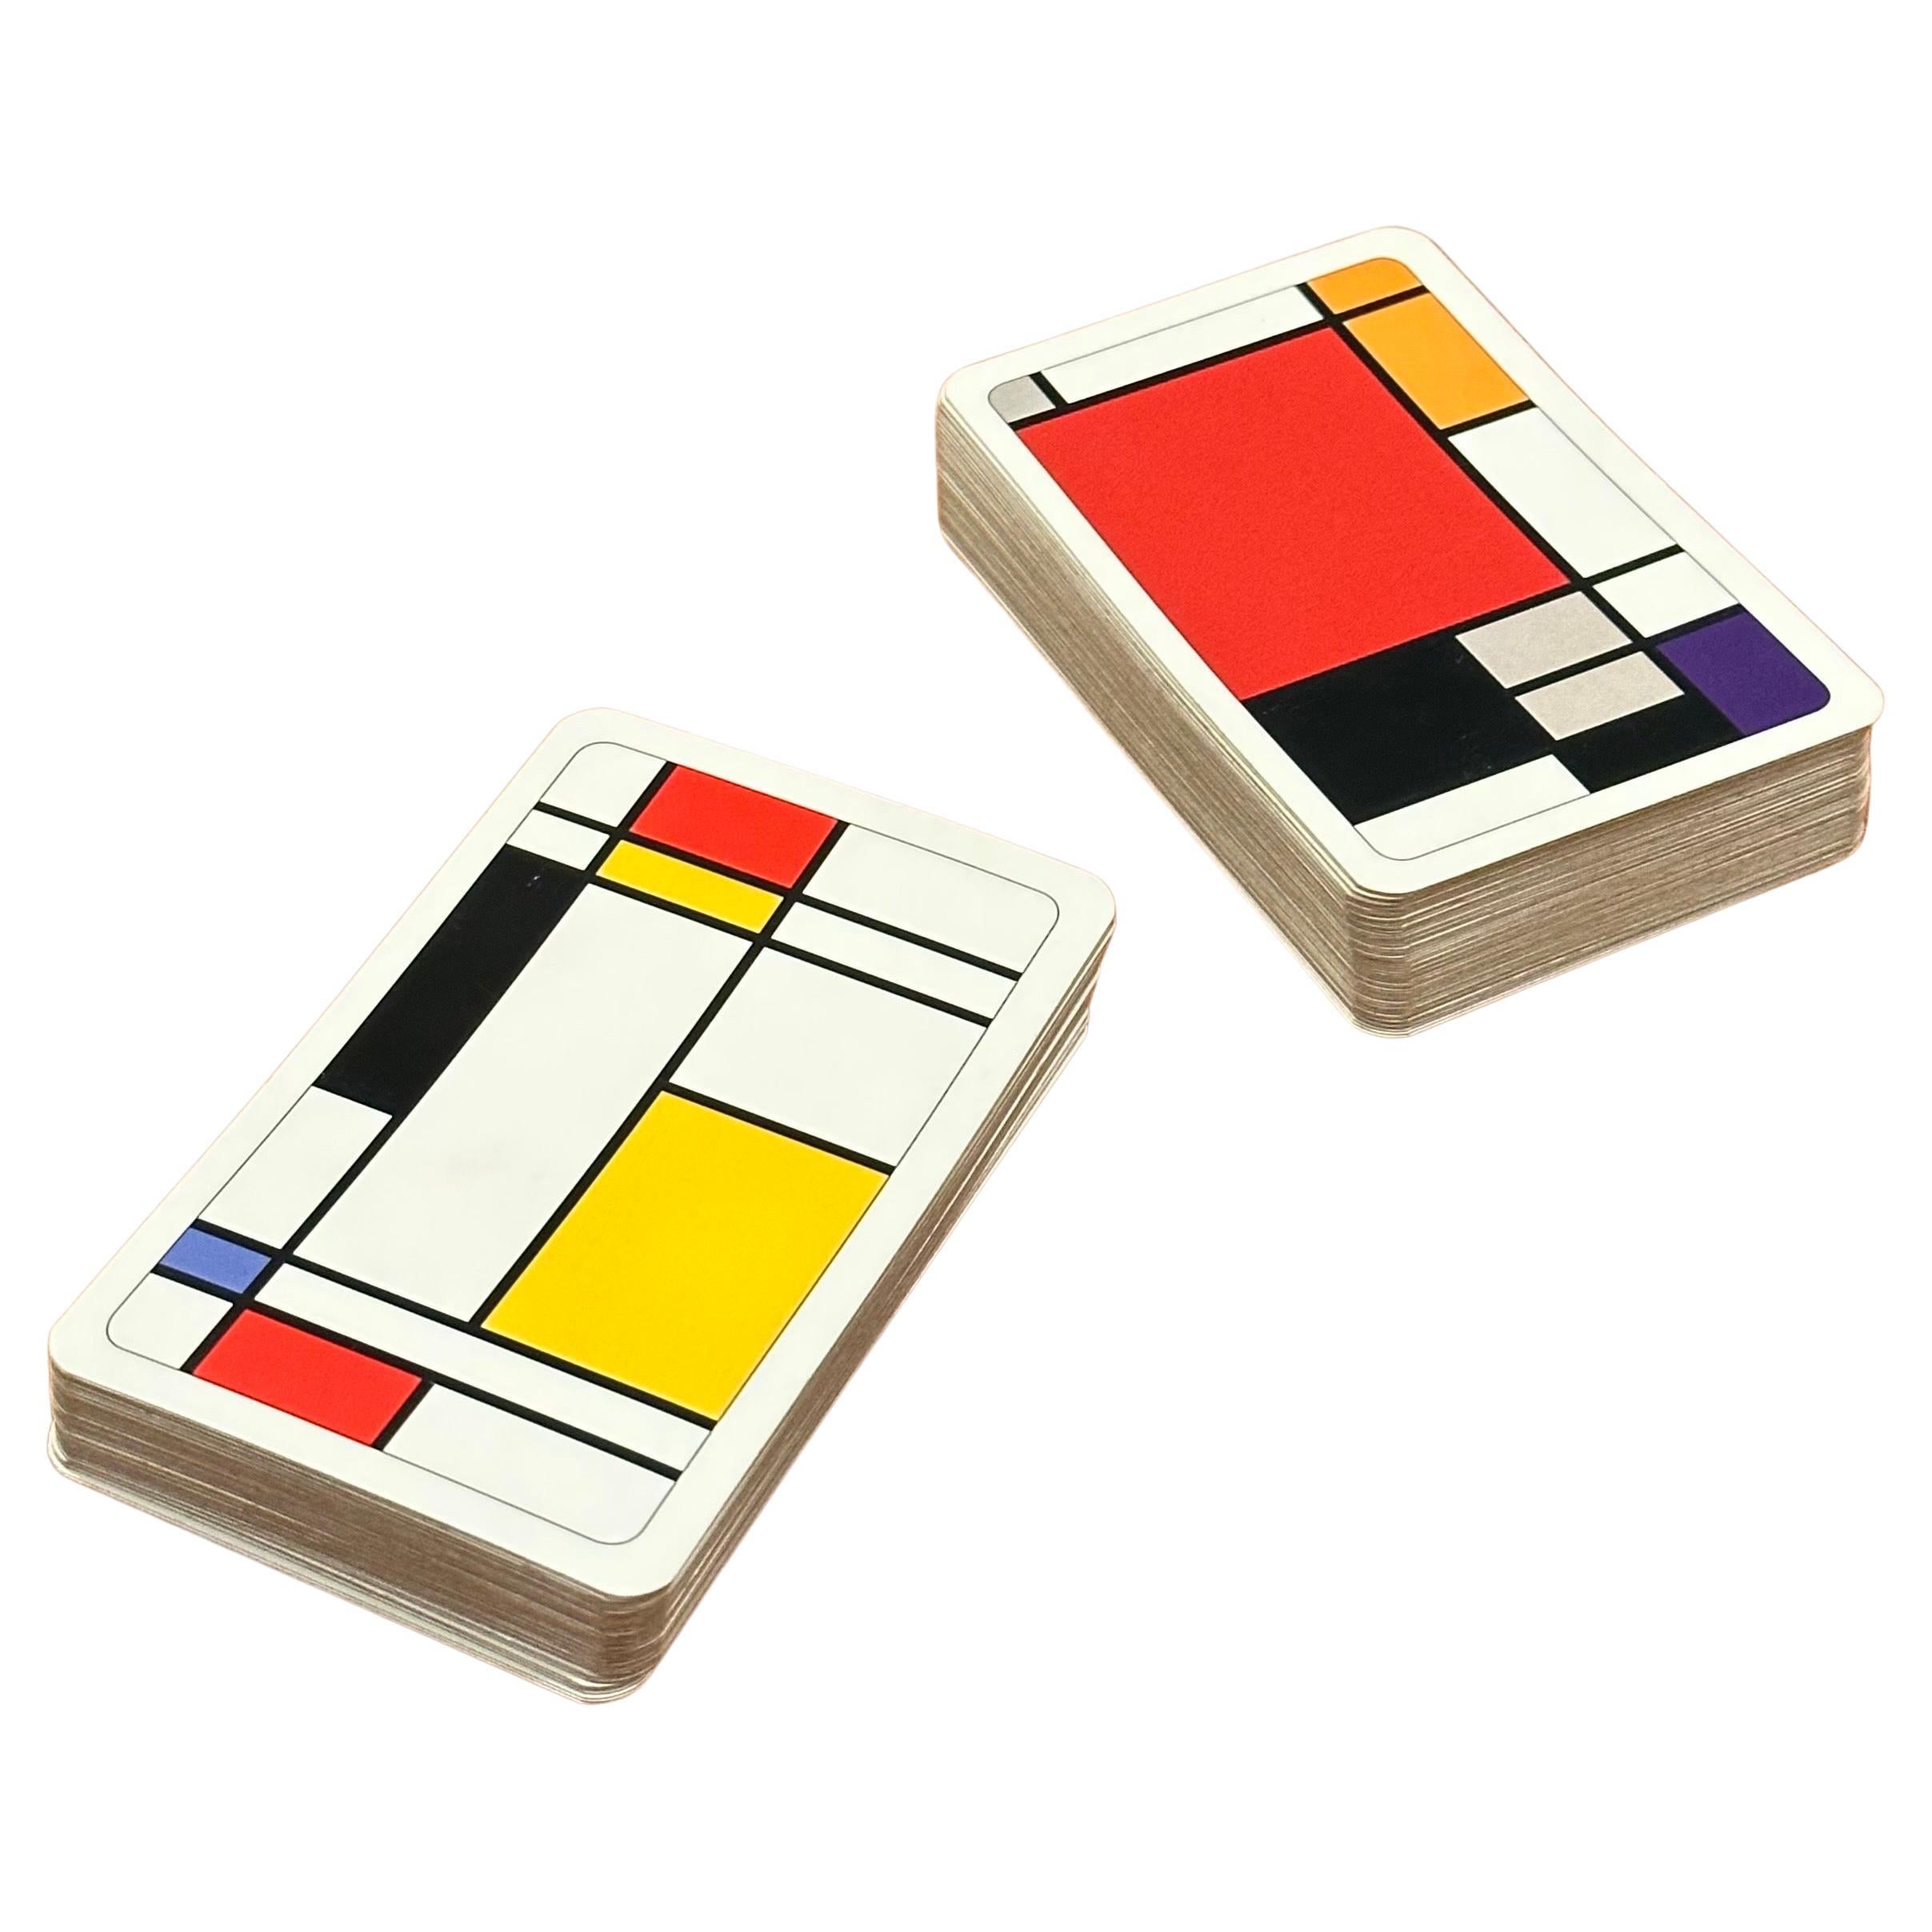 mondrian playing cards